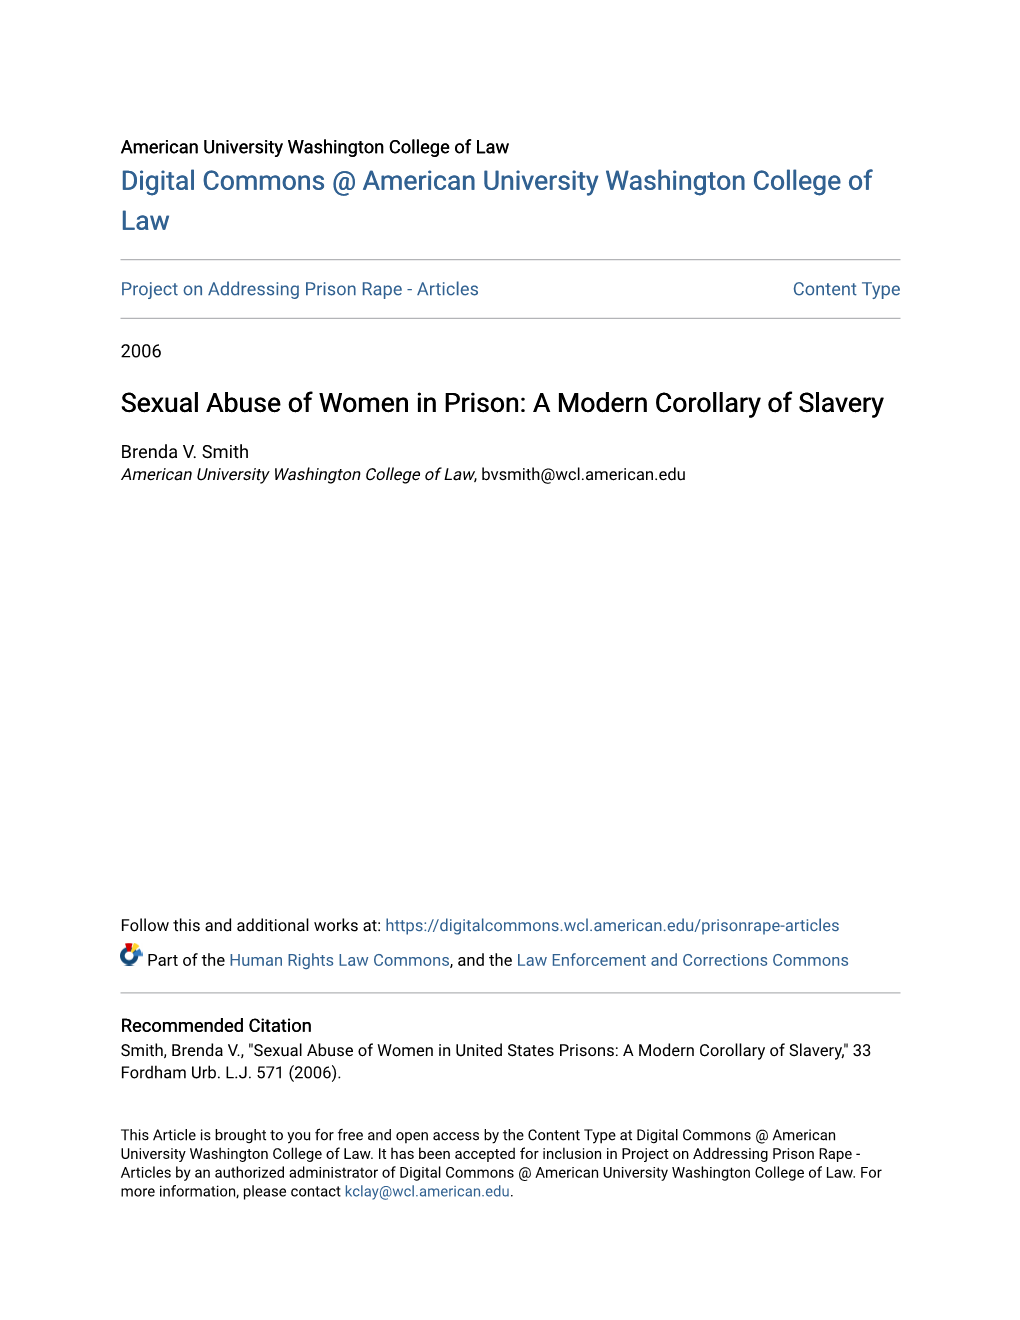 Sexual Abuse of Women in Prison: a Modern Corollary of Slavery